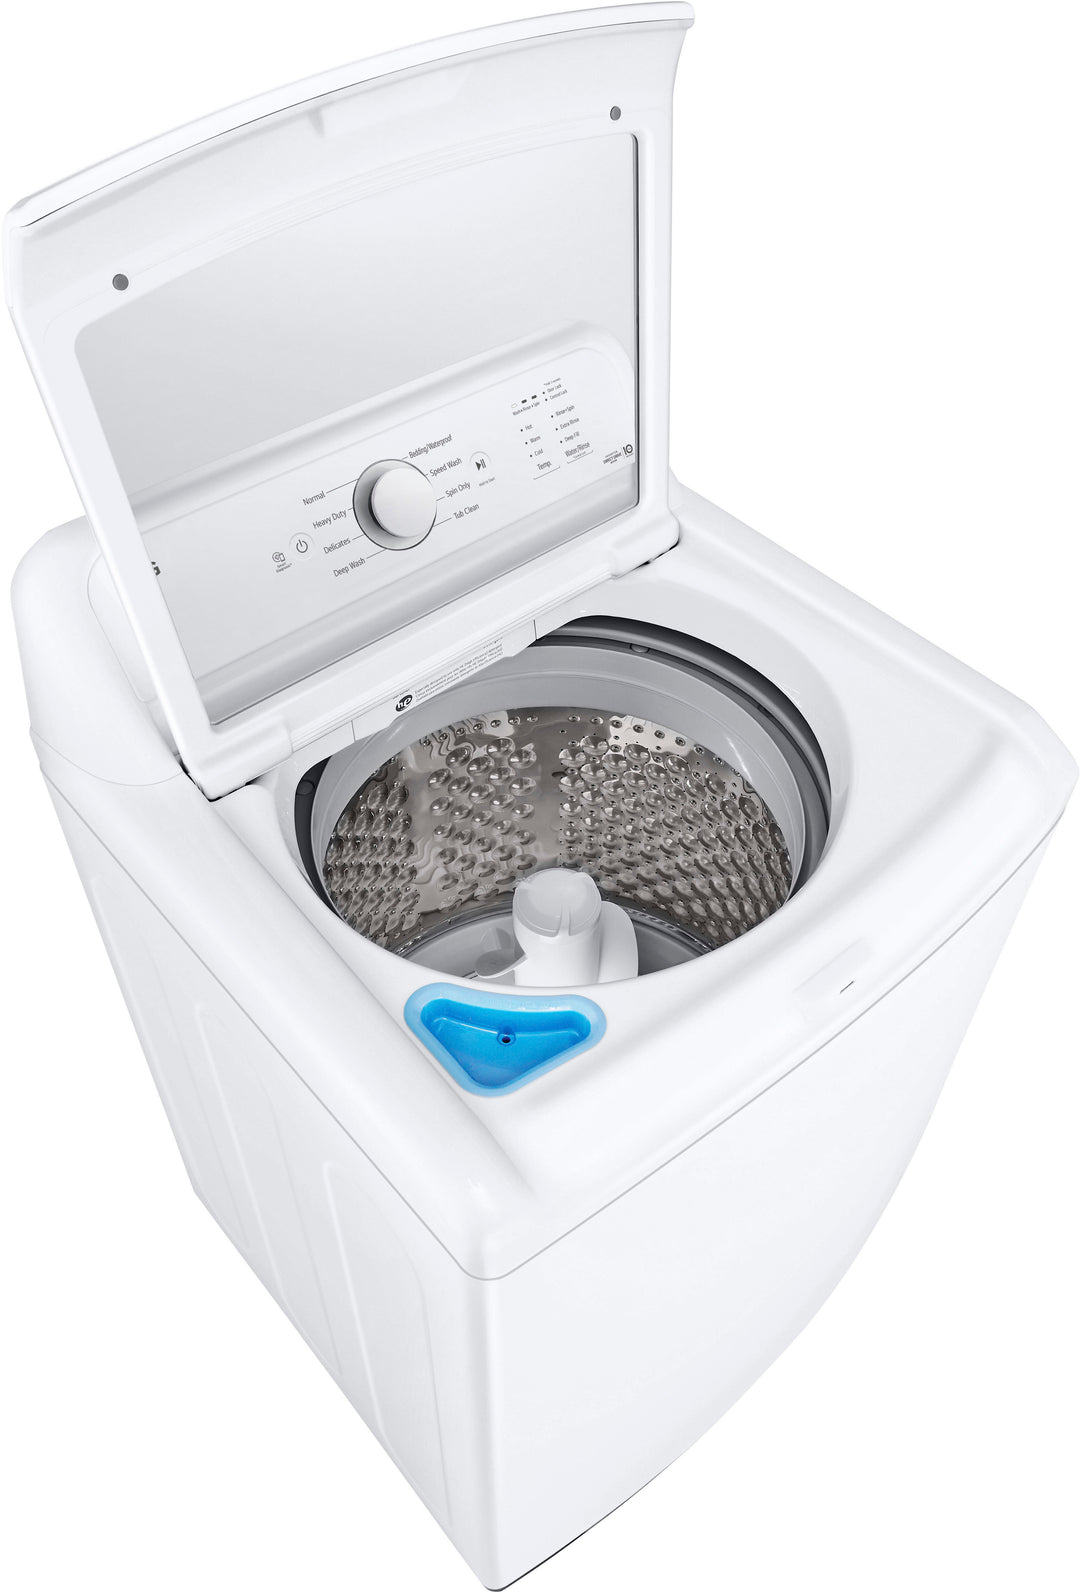 LG - 4.1 Cu. Ft. Smart Top Load Washer with SlamProof Glass Lid - White_3